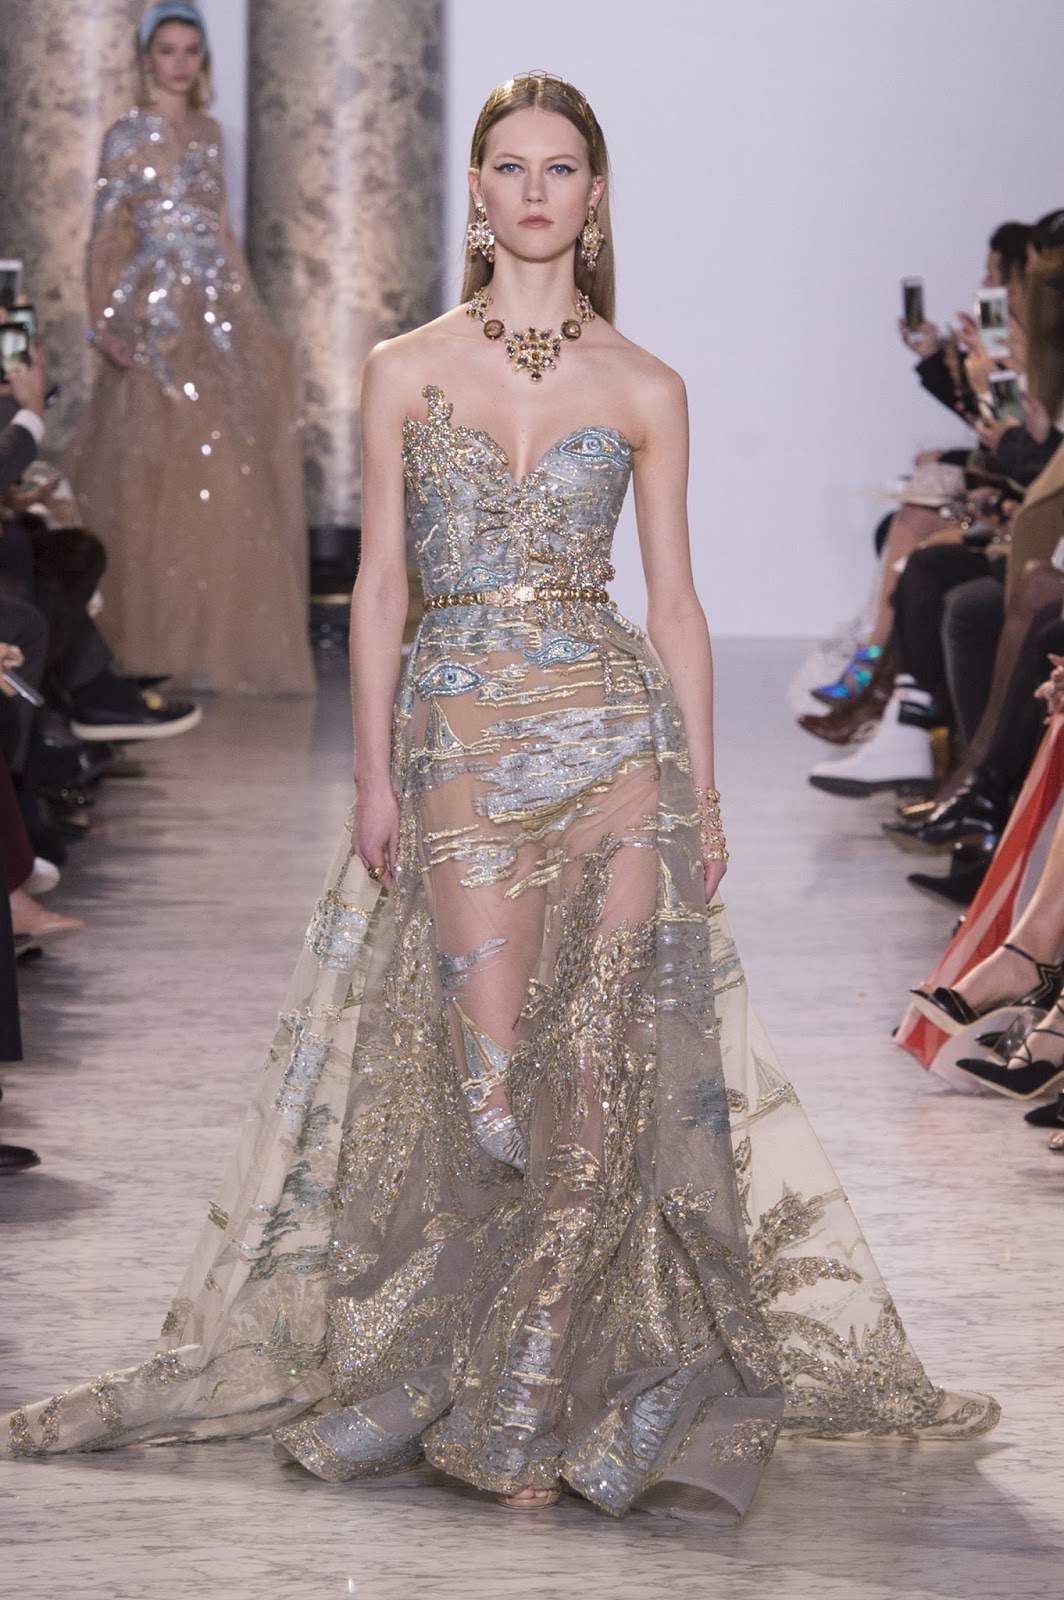 Simply Stunning: Elie Saab Haute Couture February 7, 2017 | ZsaZsa ...